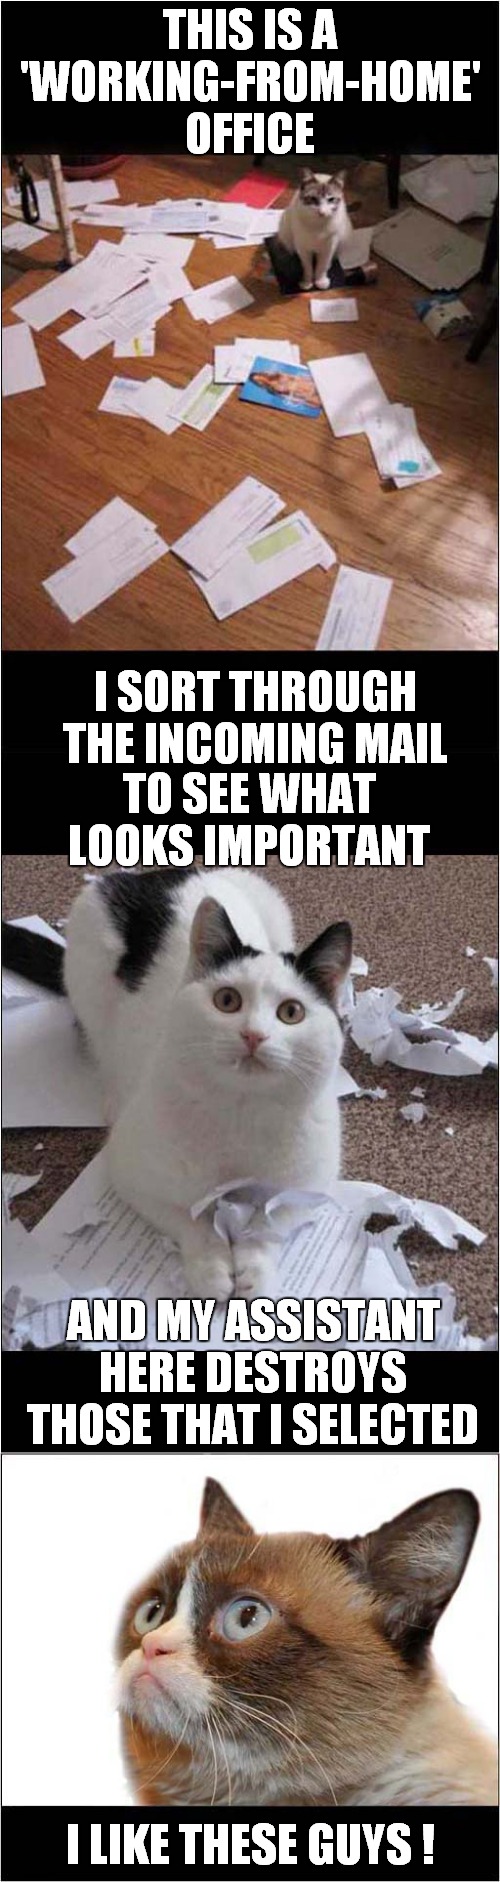 Grumpys Home Office Destruction | THIS IS A 'WORKING-FROM-HOME' OFFICE; I SORT THROUGH THE INCOMING MAIL; TO SEE WHAT LOOKS IMPORTANT; AND MY ASSISTANT HERE DESTROYS THOSE THAT I SELECTED; I LIKE THESE GUYS ! | image tagged in fun,grumpy cat,office,destruction | made w/ Imgflip meme maker